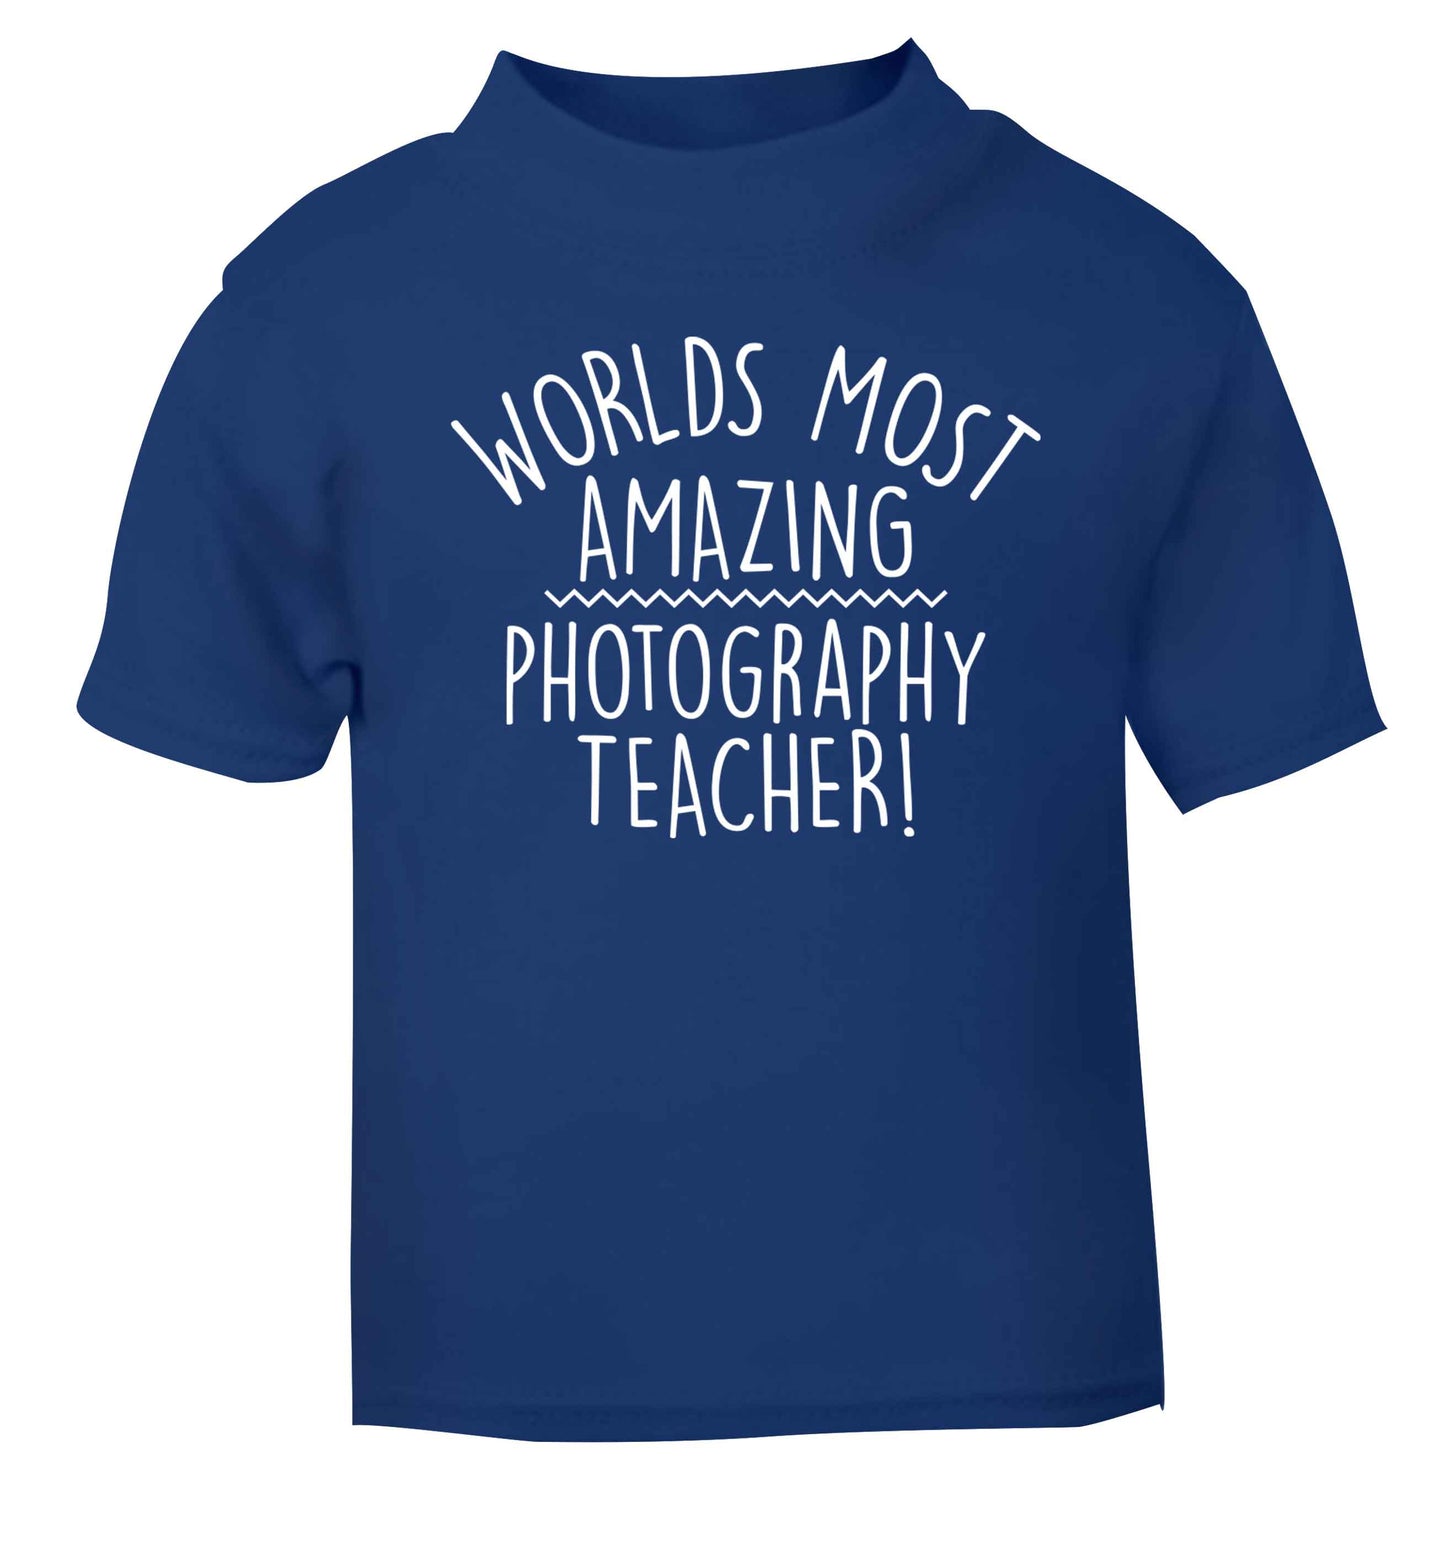 Worlds most amazing photography teacher blue baby toddler Tshirt 2 Years